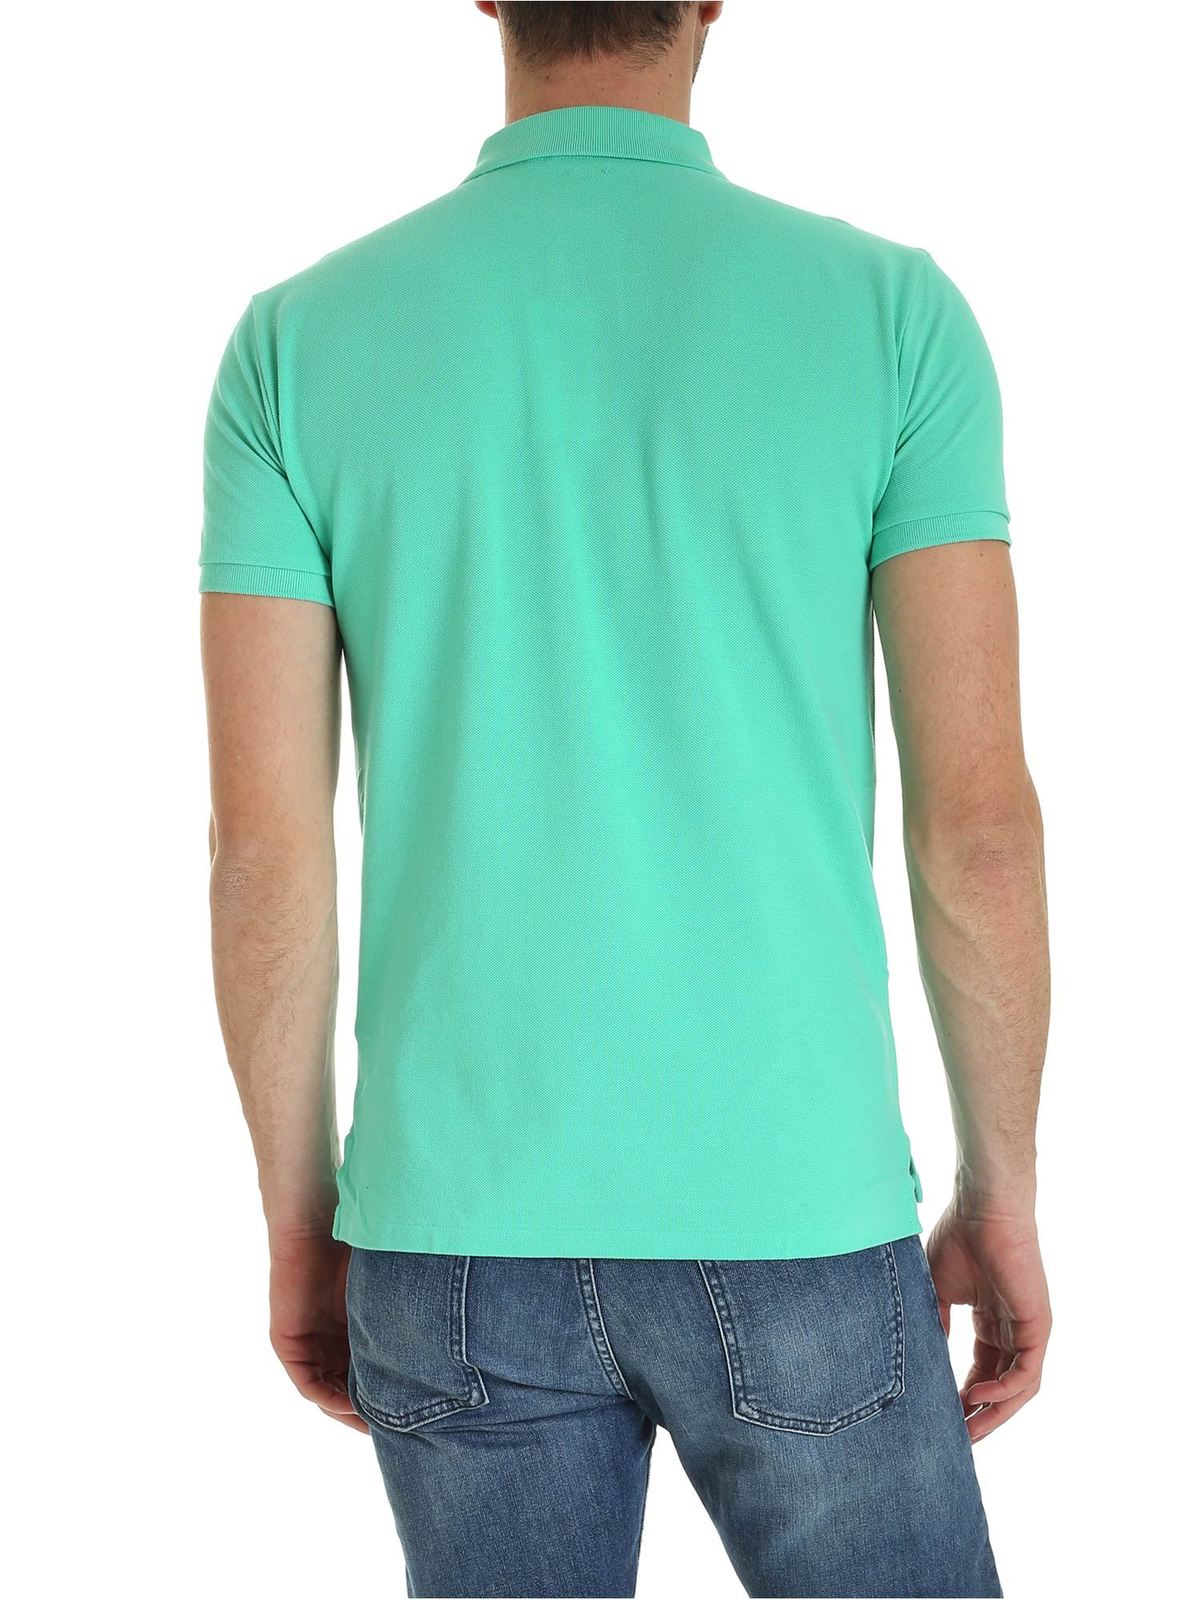 sokken heilig Horizontaal Polo shirts Polo Ralph Lauren - Slim fit polo shirt in mint green with pink  l - 710795080020